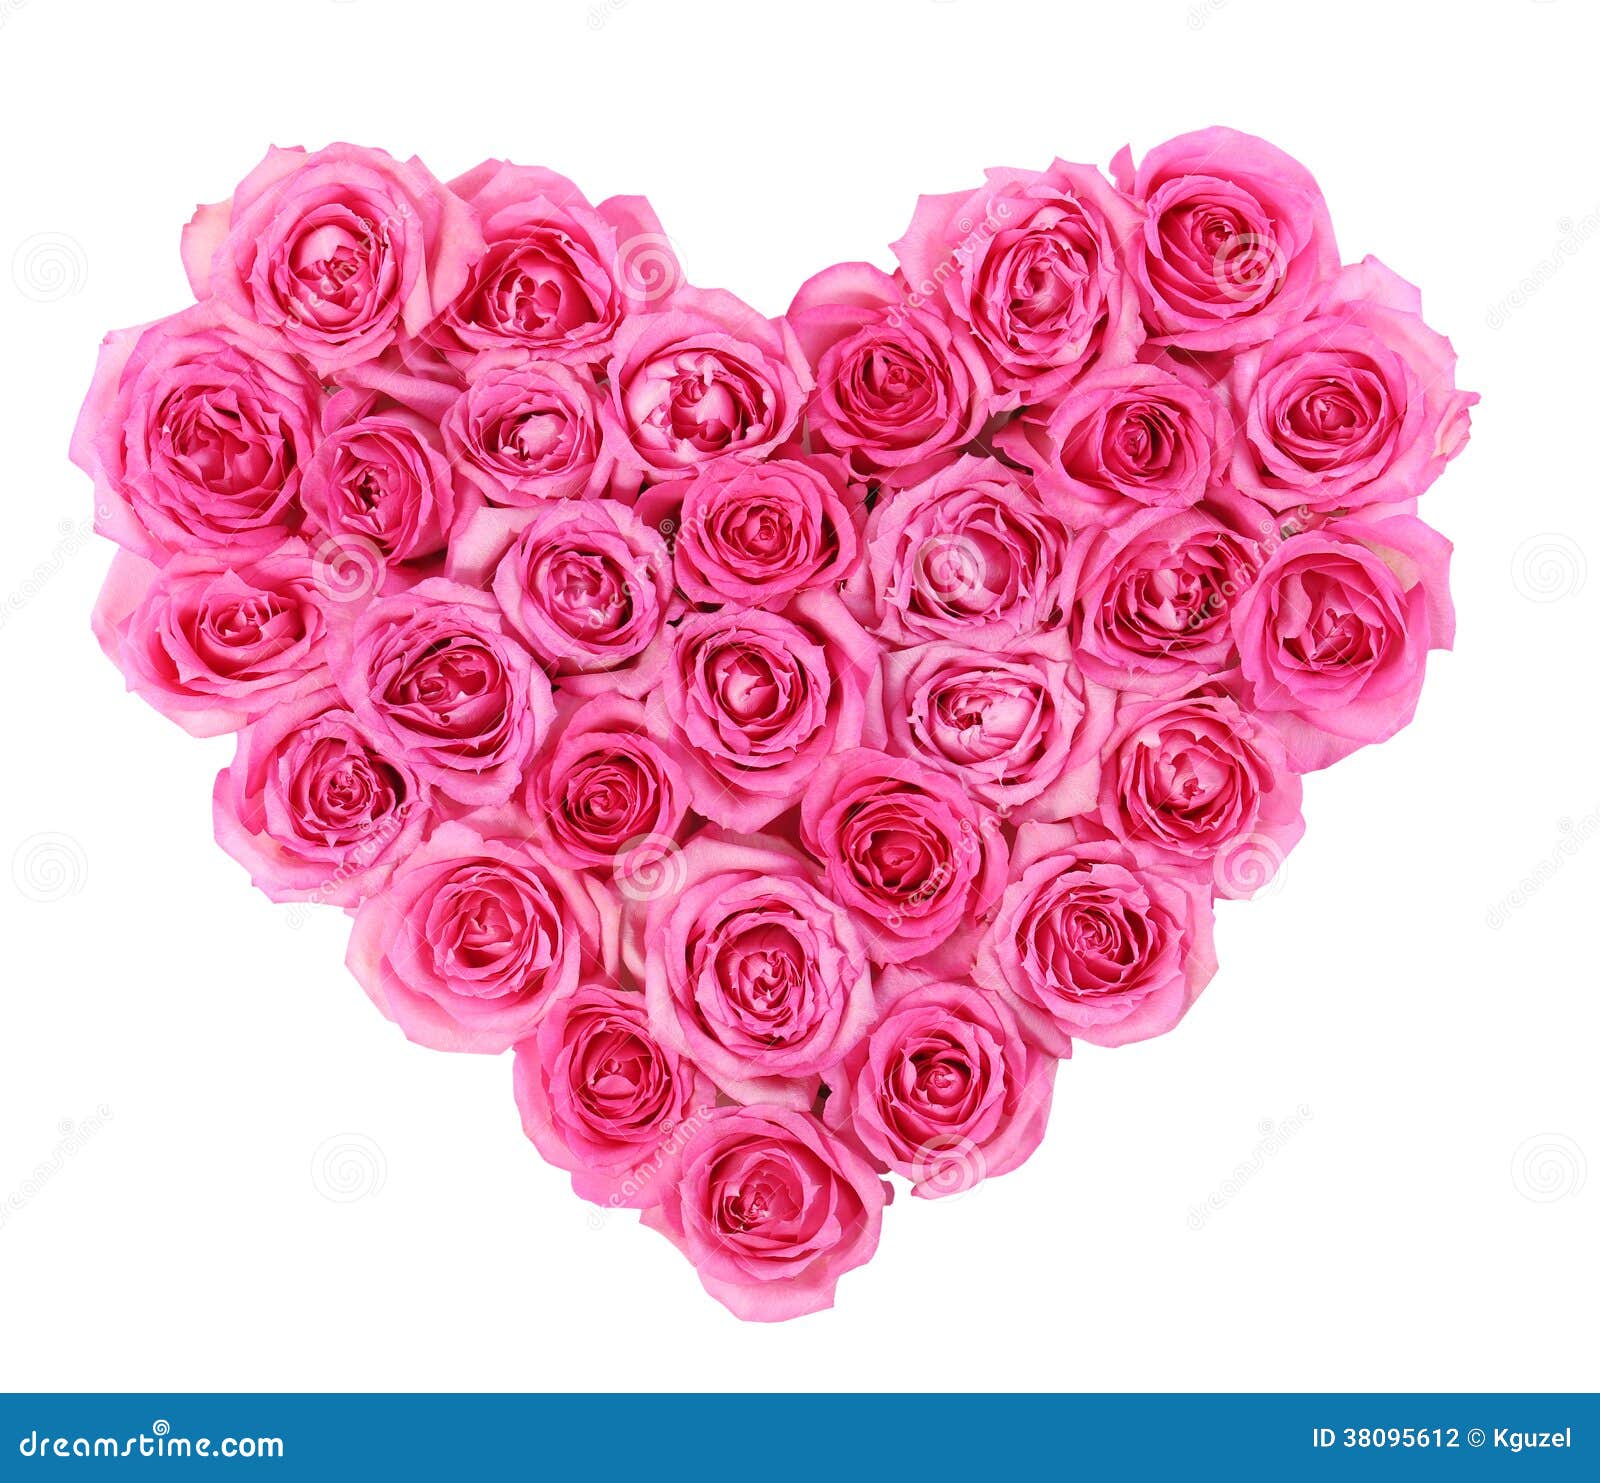 Pink Roses And Hearts Wallpaper